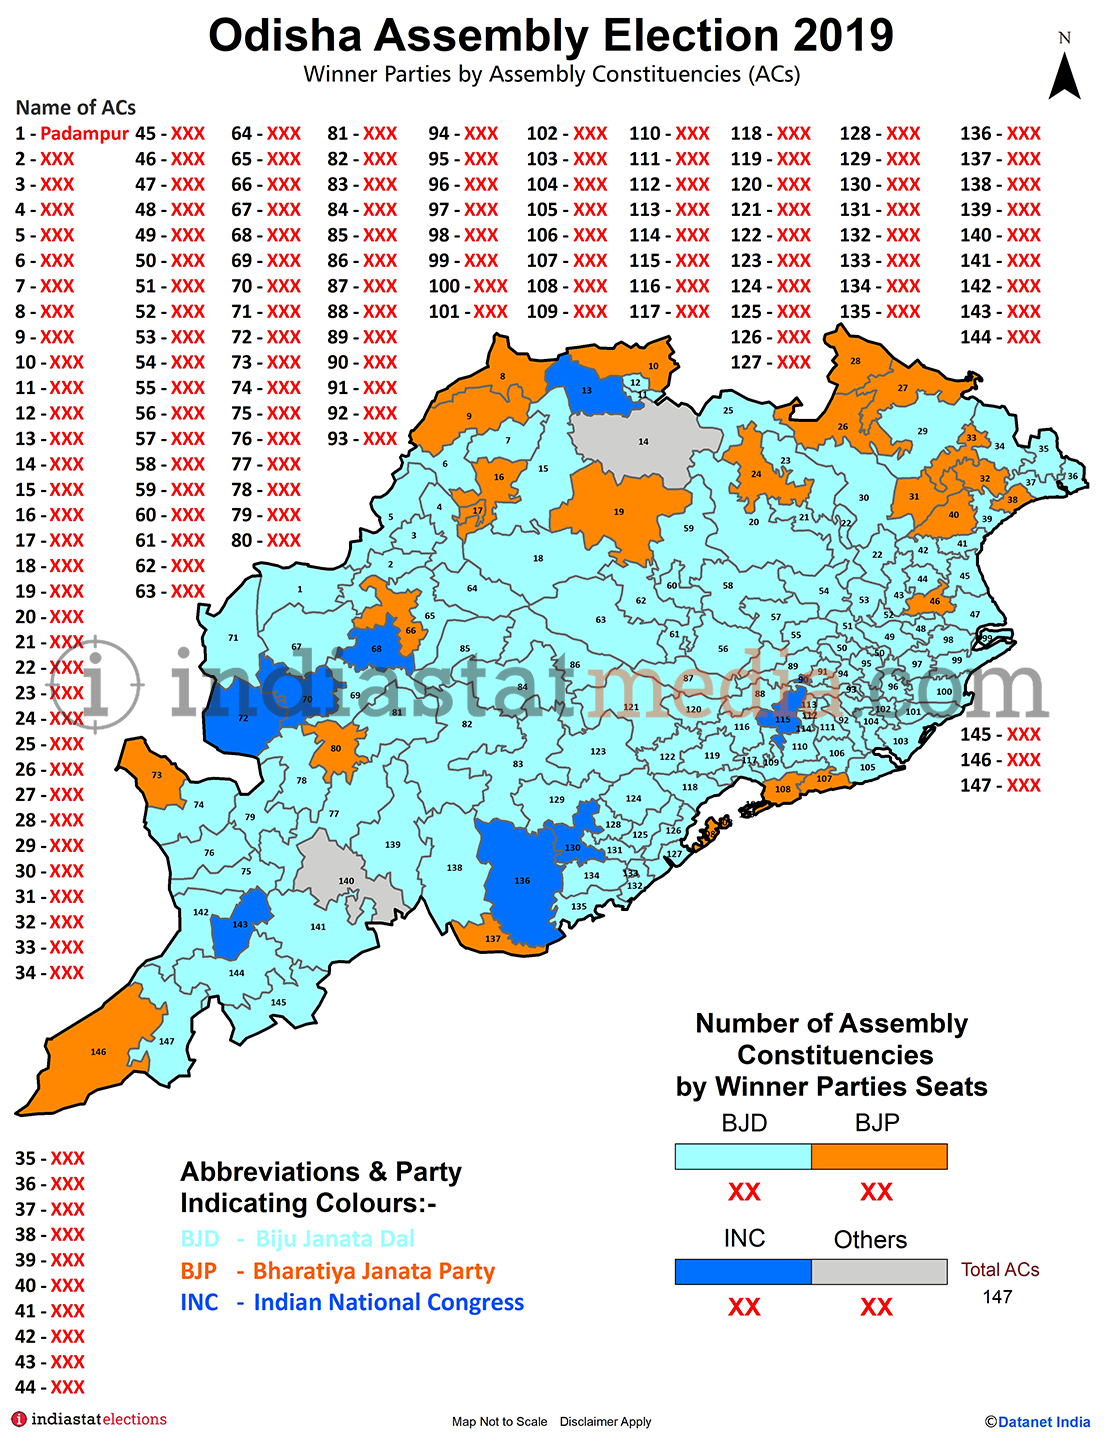 Winner Parties by Assembly Constituencies in Odisha (Assembly Election - 2019)